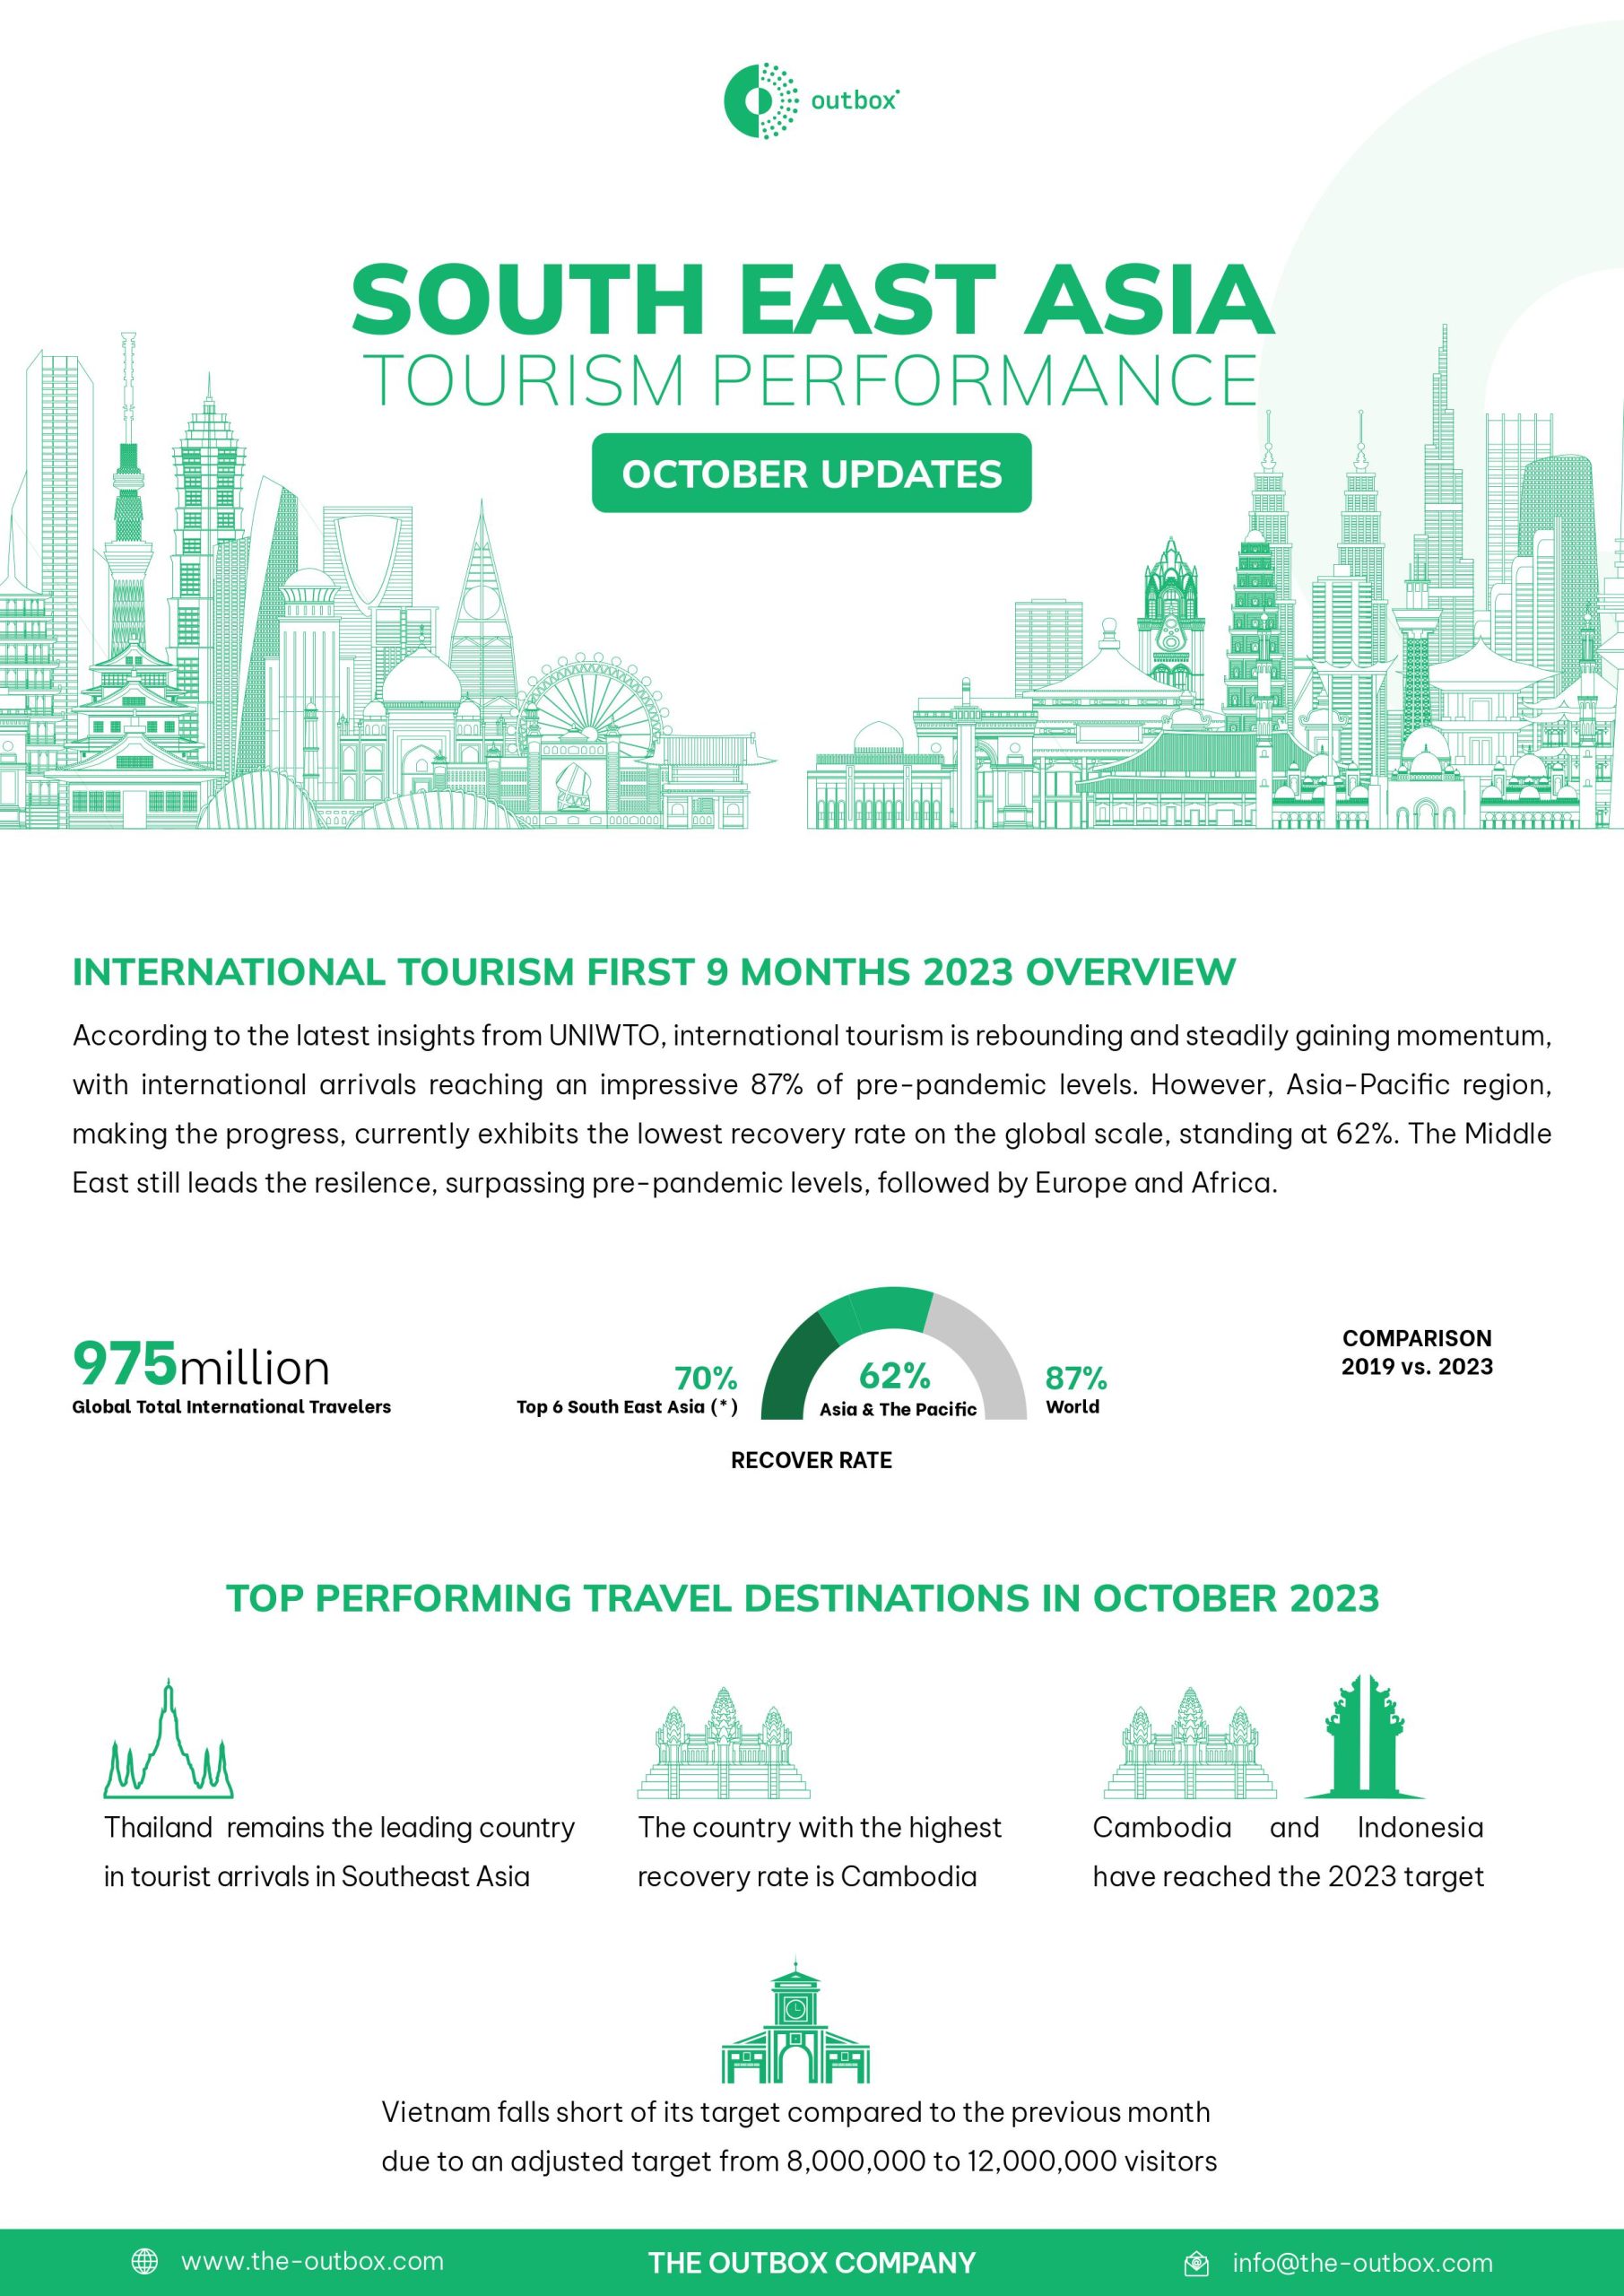 SEA Tourism Performance in Oct 2023 (1)